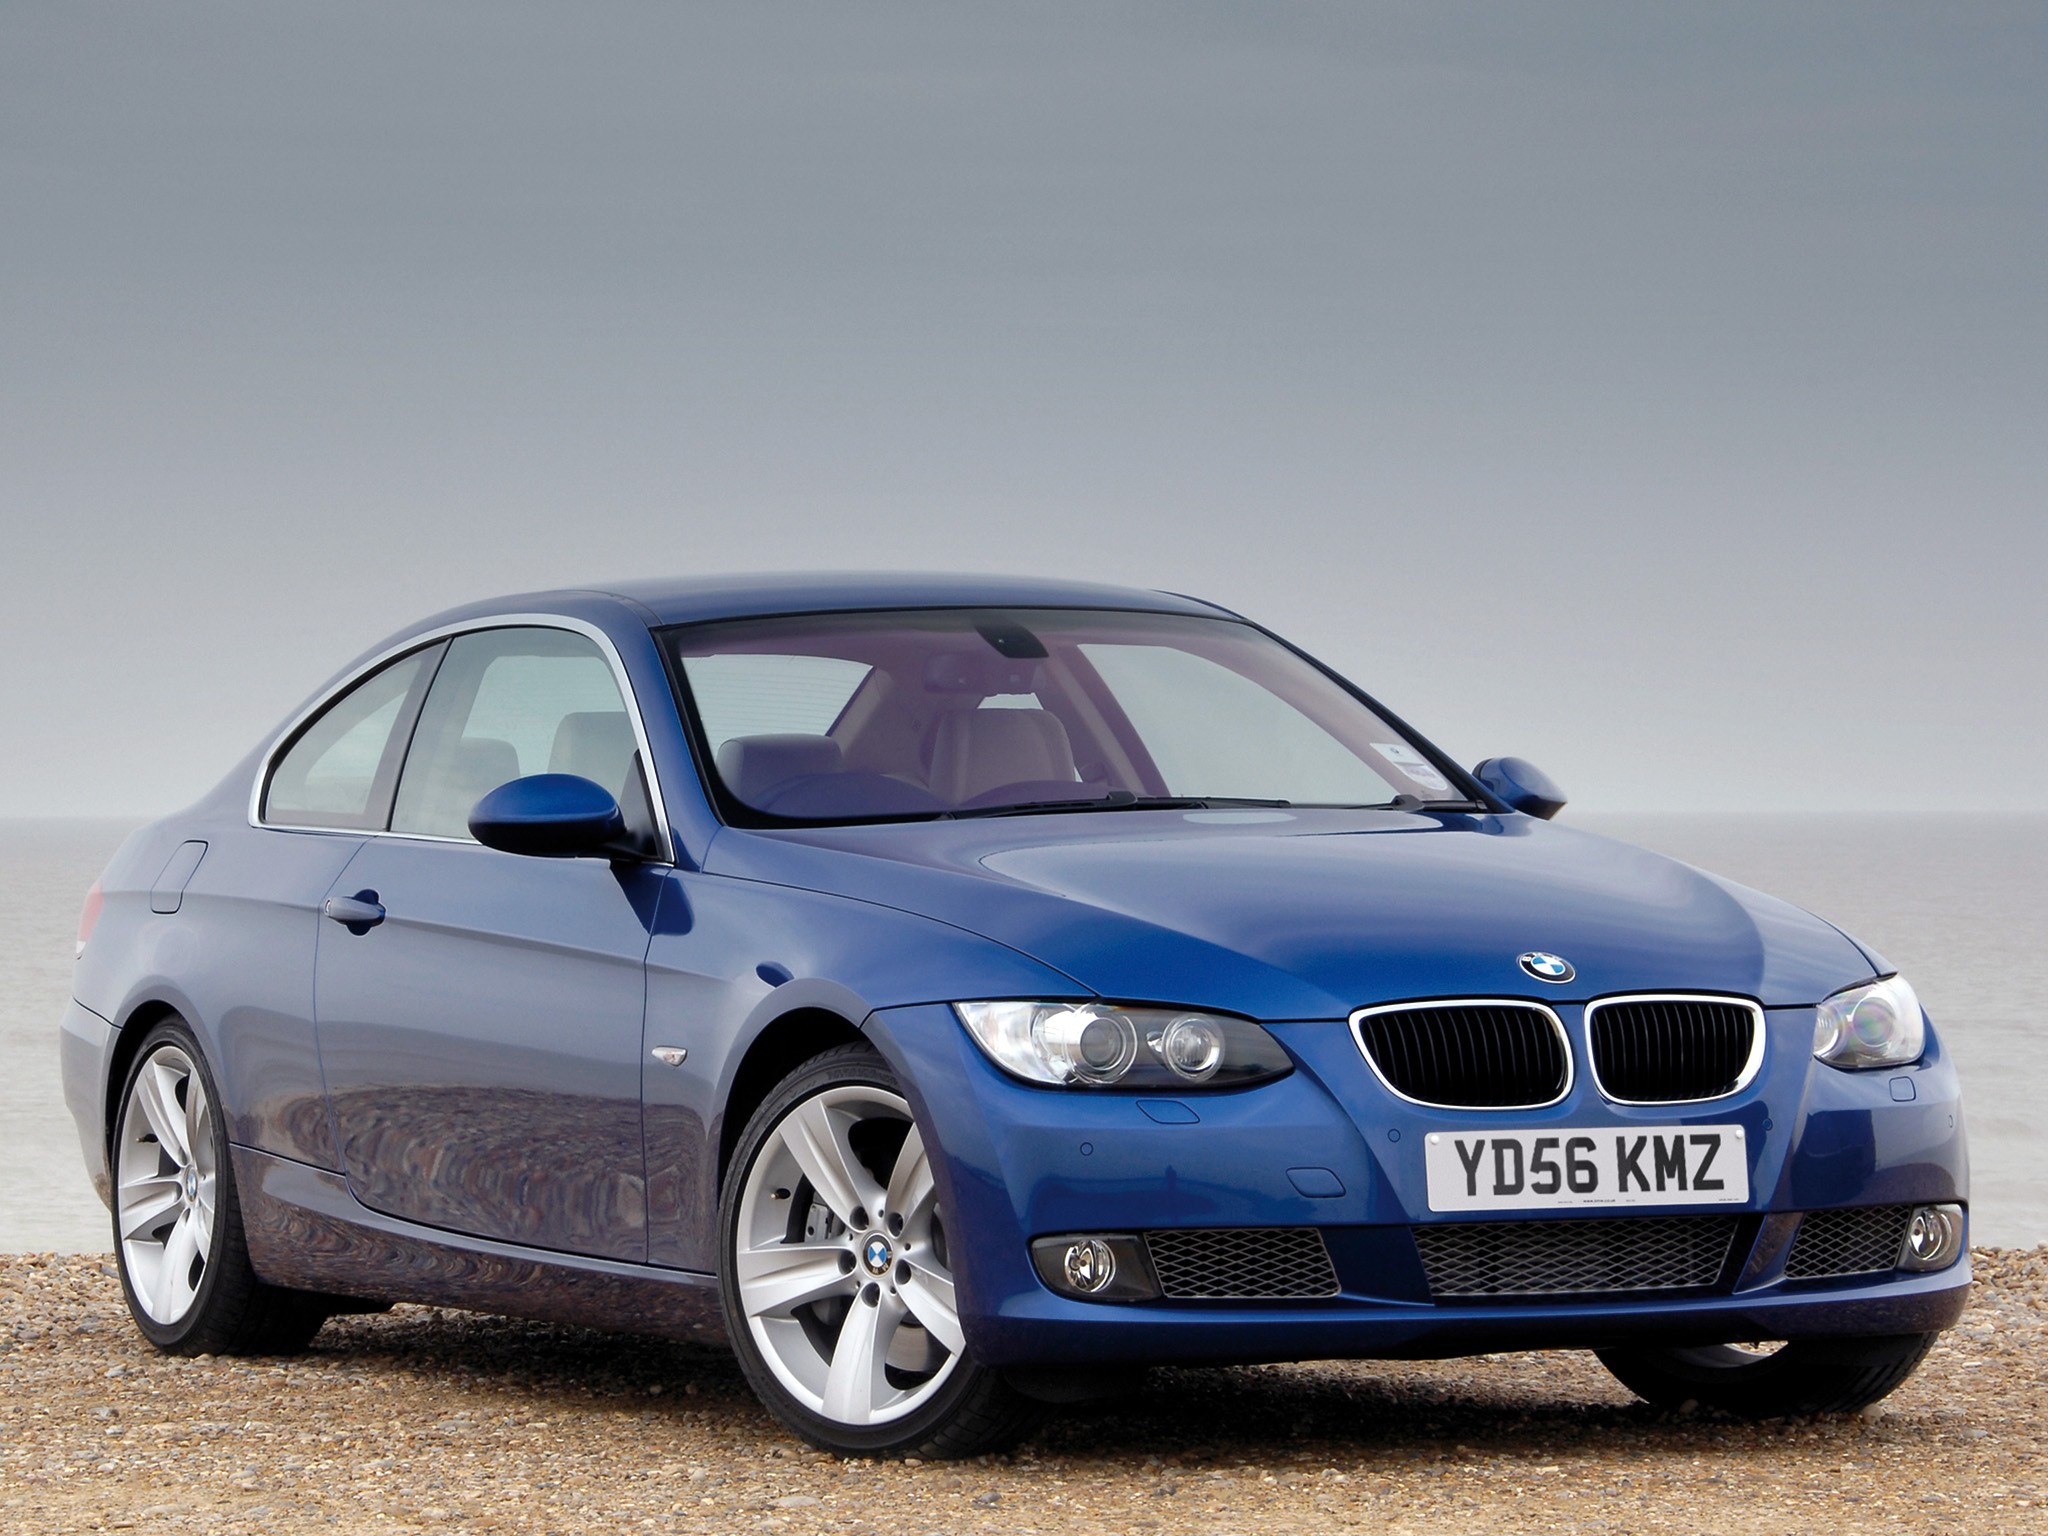 2006 Bmw 3 series coupe brochure